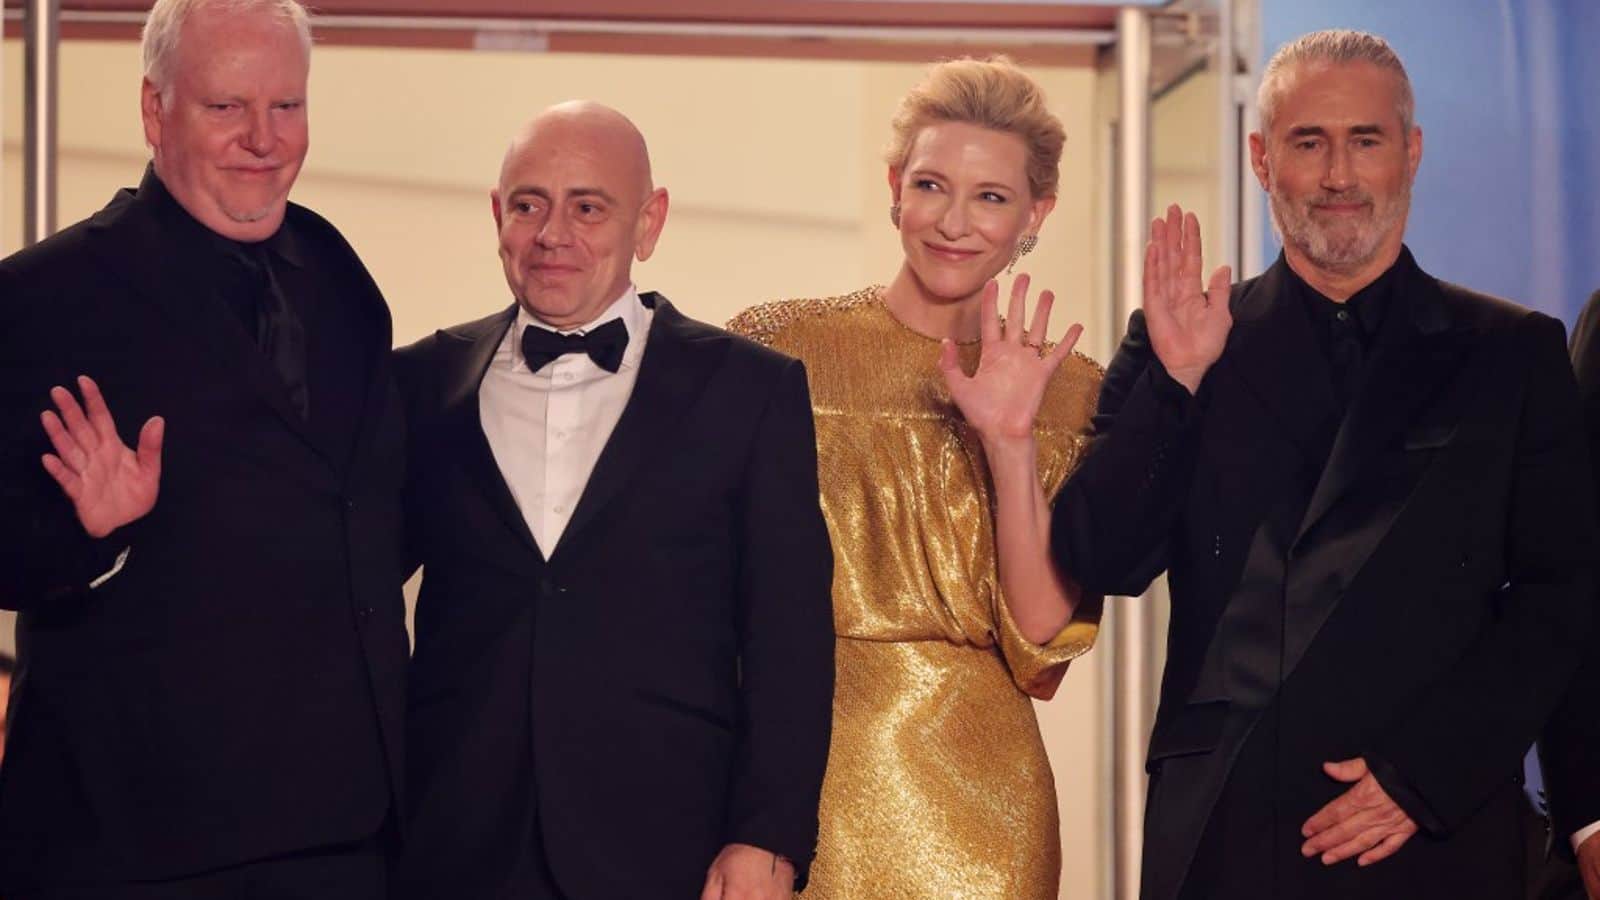 'Rumours' starring Cate Blanchett earns nearly four-minute ovation at Cannes